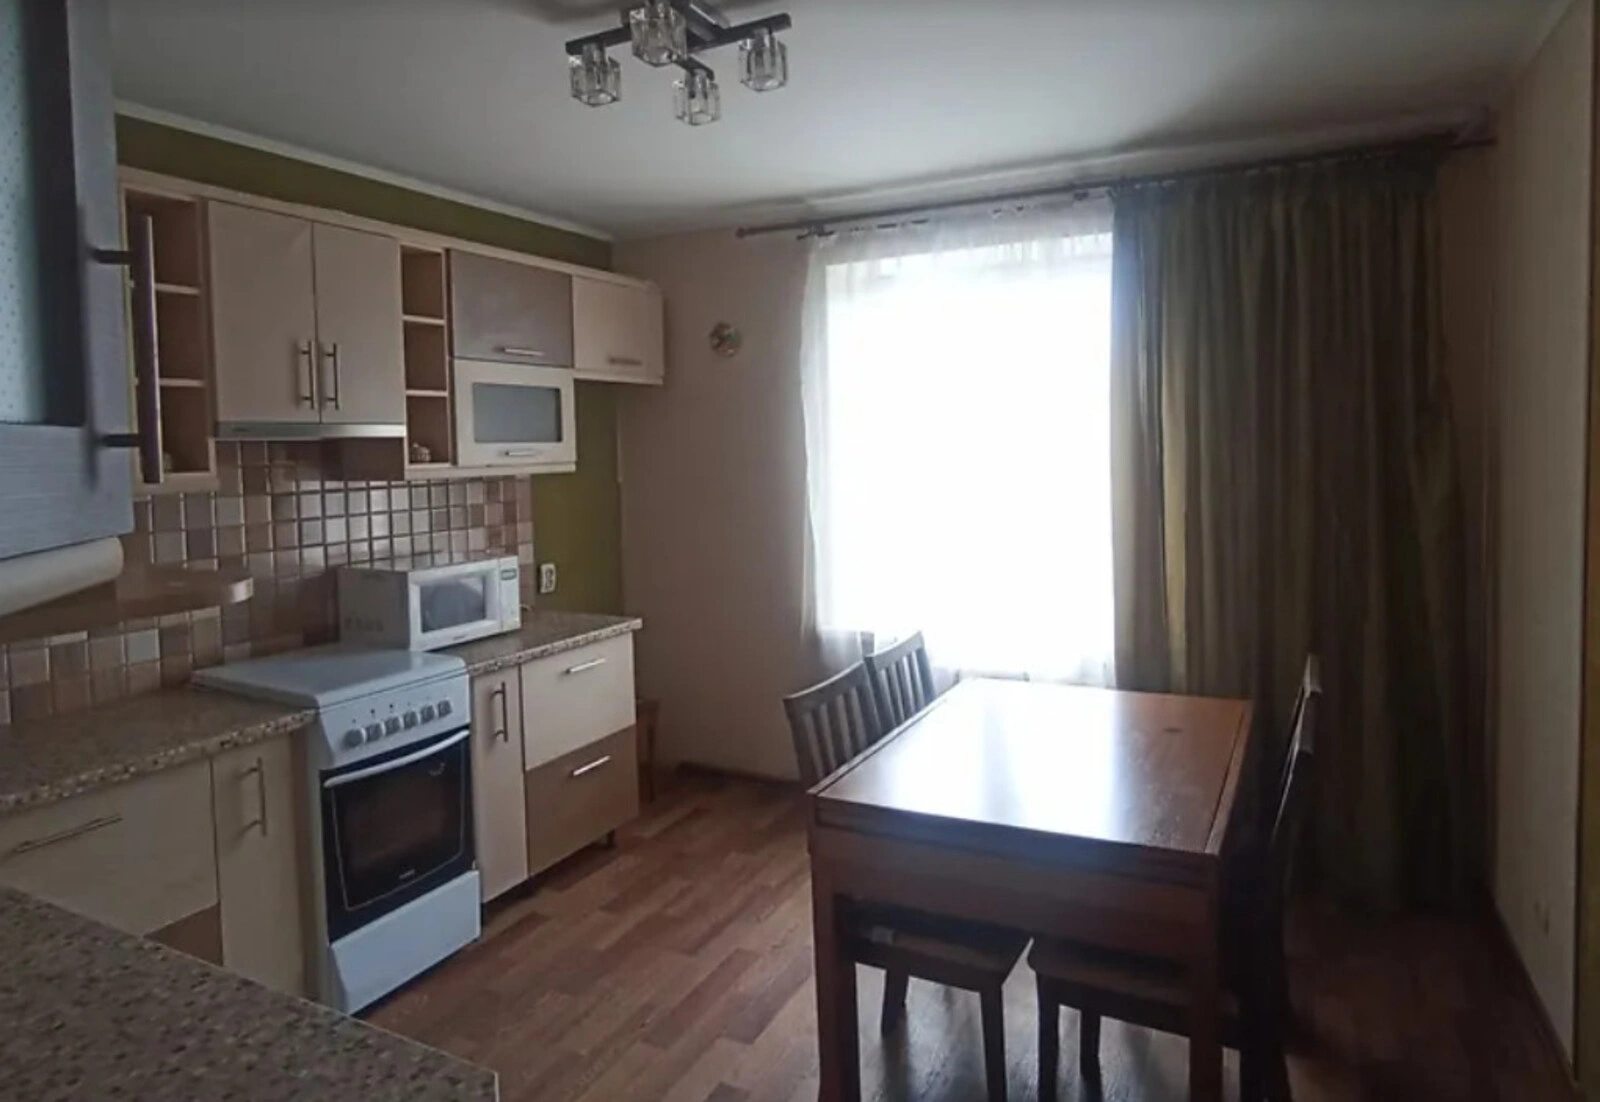 Apartments for sale. 1 room, 33 m², 8th floor/9 floors. Bam, Ternopil. 